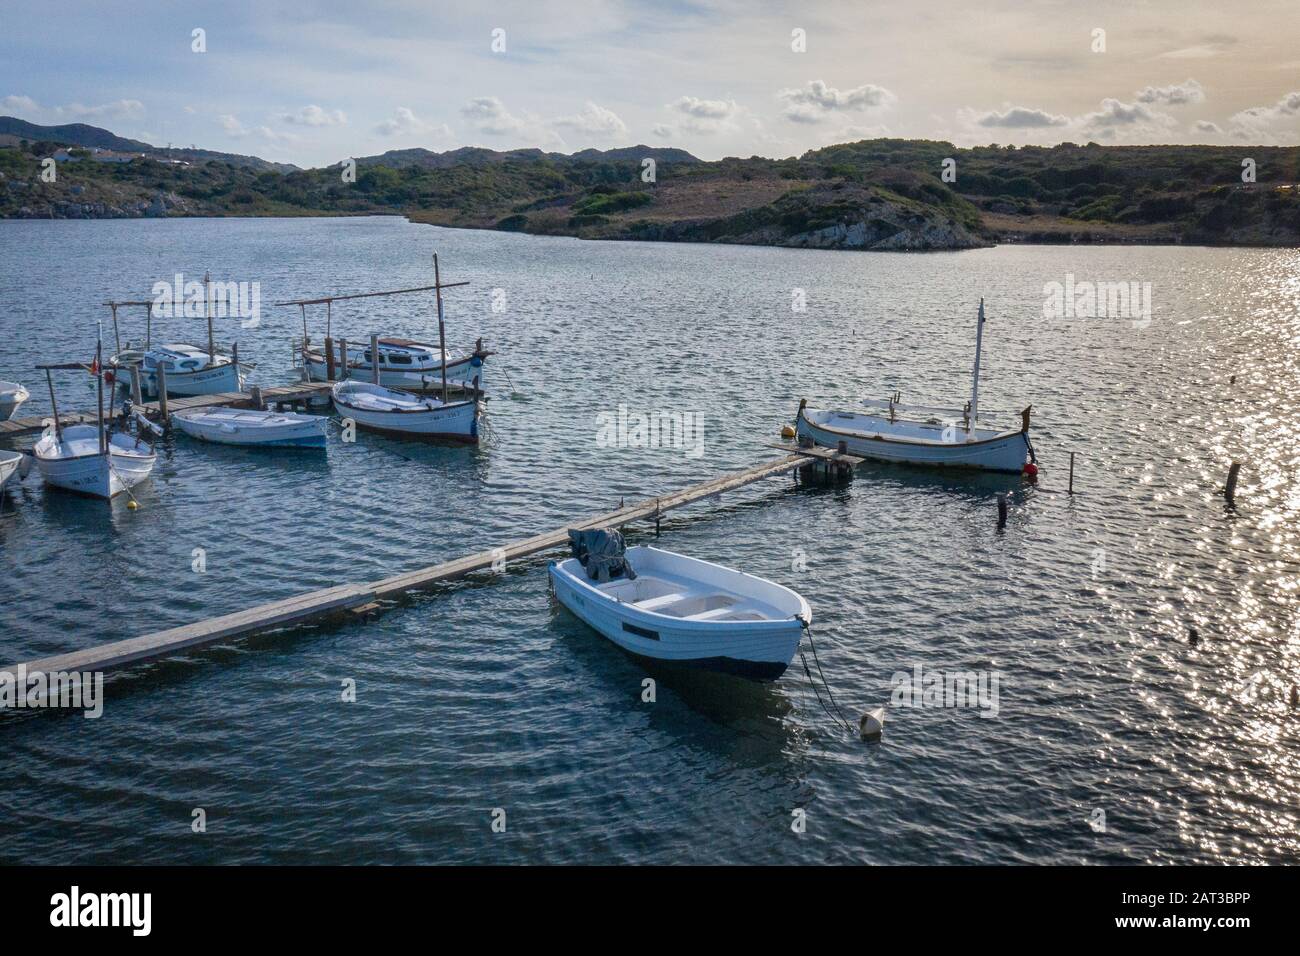 Spanish fishing boats moored in natural harbour Stock Photo